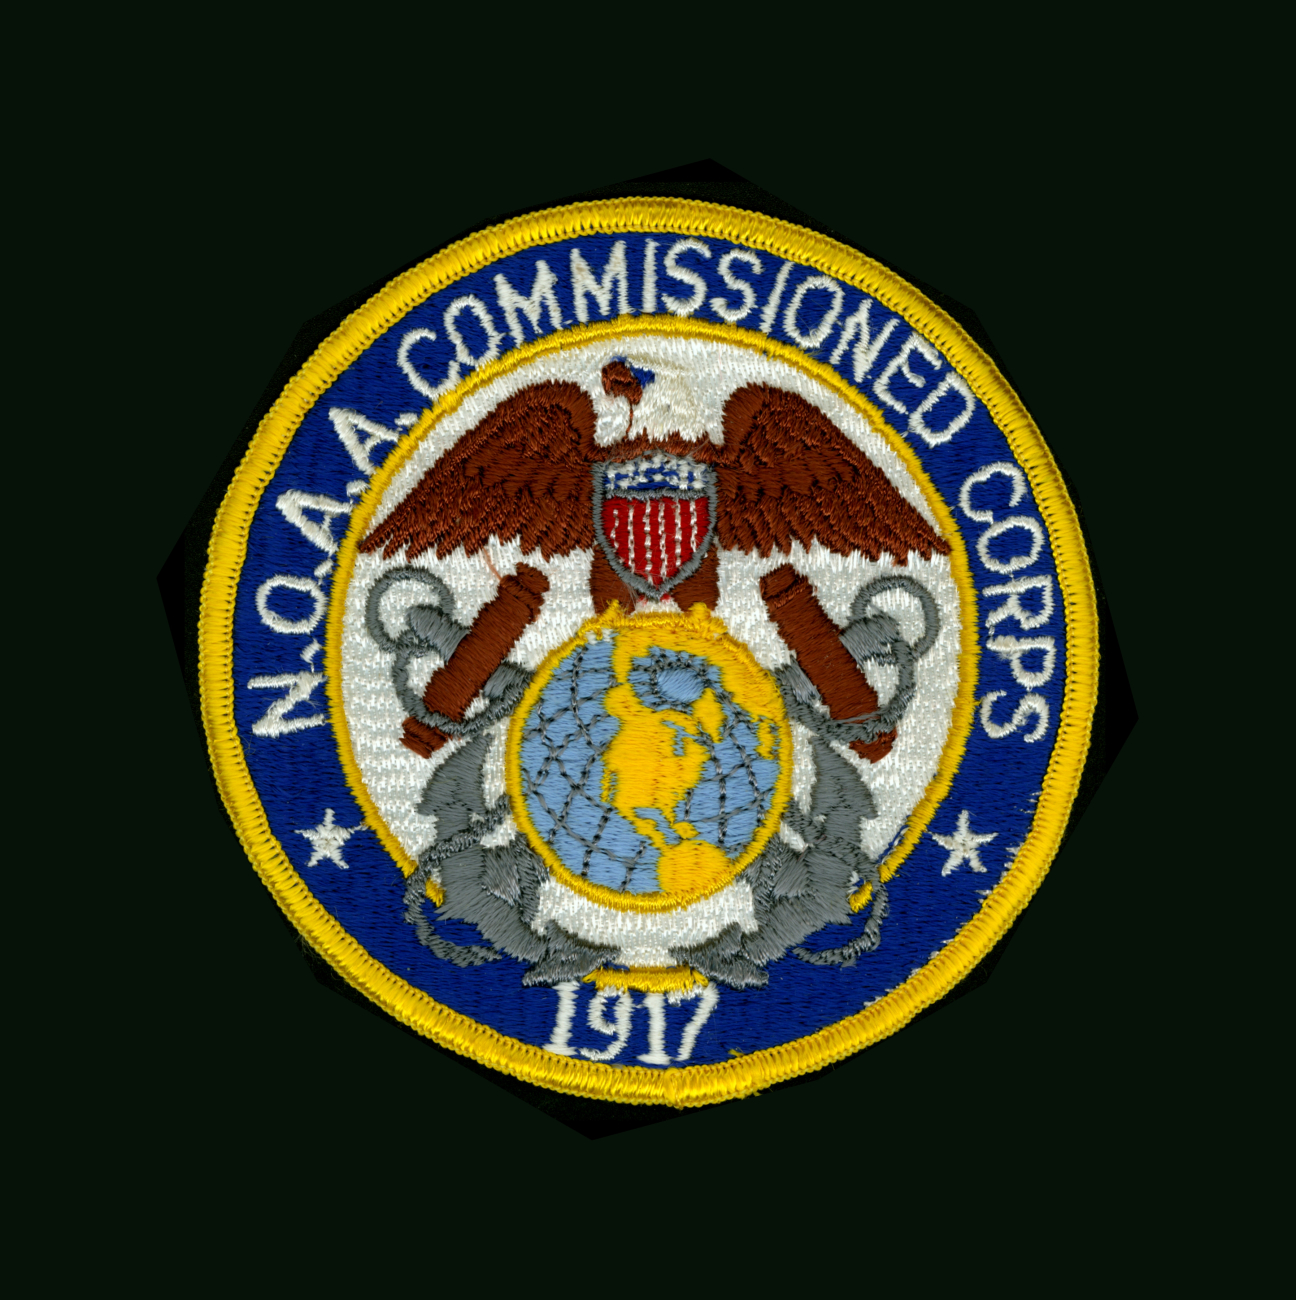 Patch commemorating the commissioned Corps of the National Oceanic andAtmospheric Administration